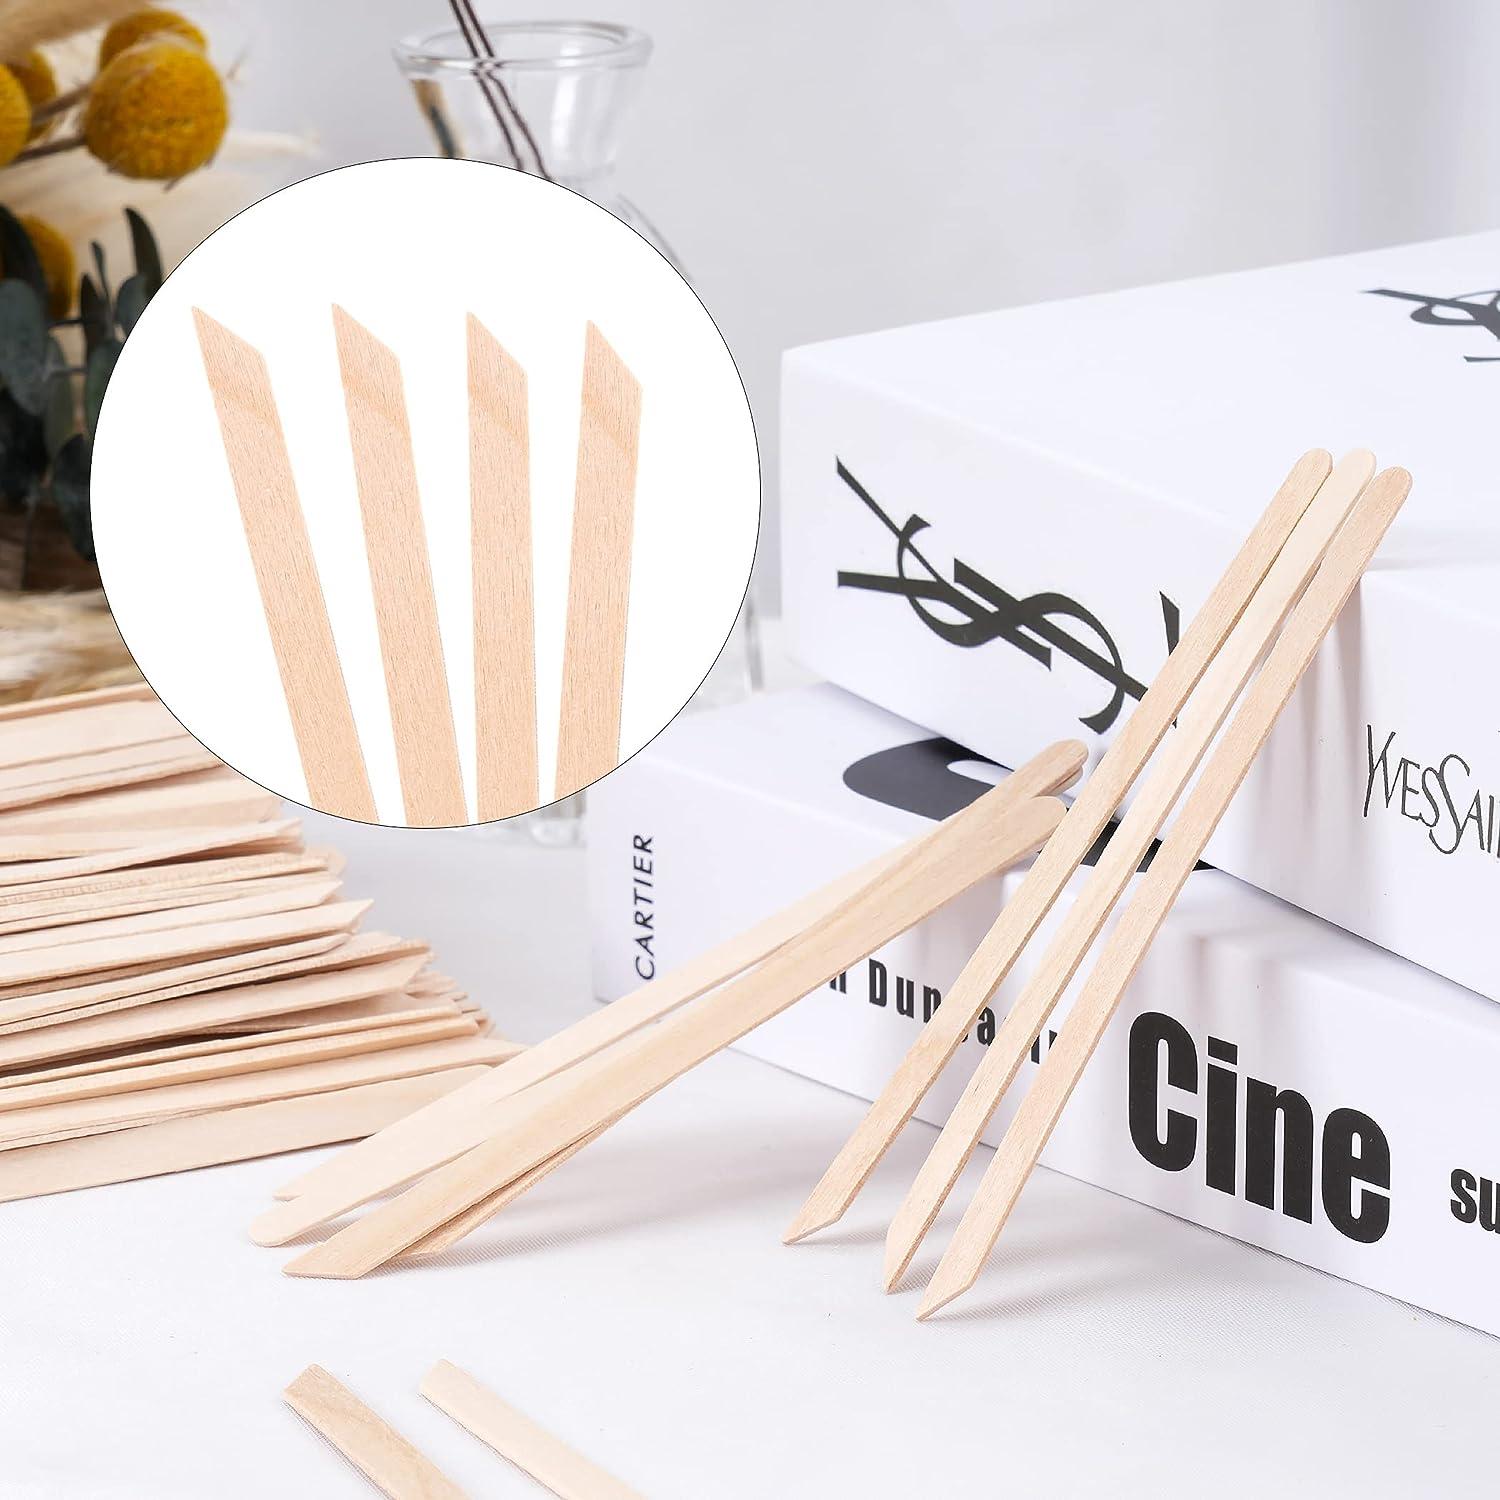 100pcs Wooden Waxing Sticks Set- Includes Body, Brow, Lip, Nose Wax Sticks  For Professional Salon & Home Use, Multifunctional Beauty Tool For Painless  Hair Removal, Nail Art & Grooming